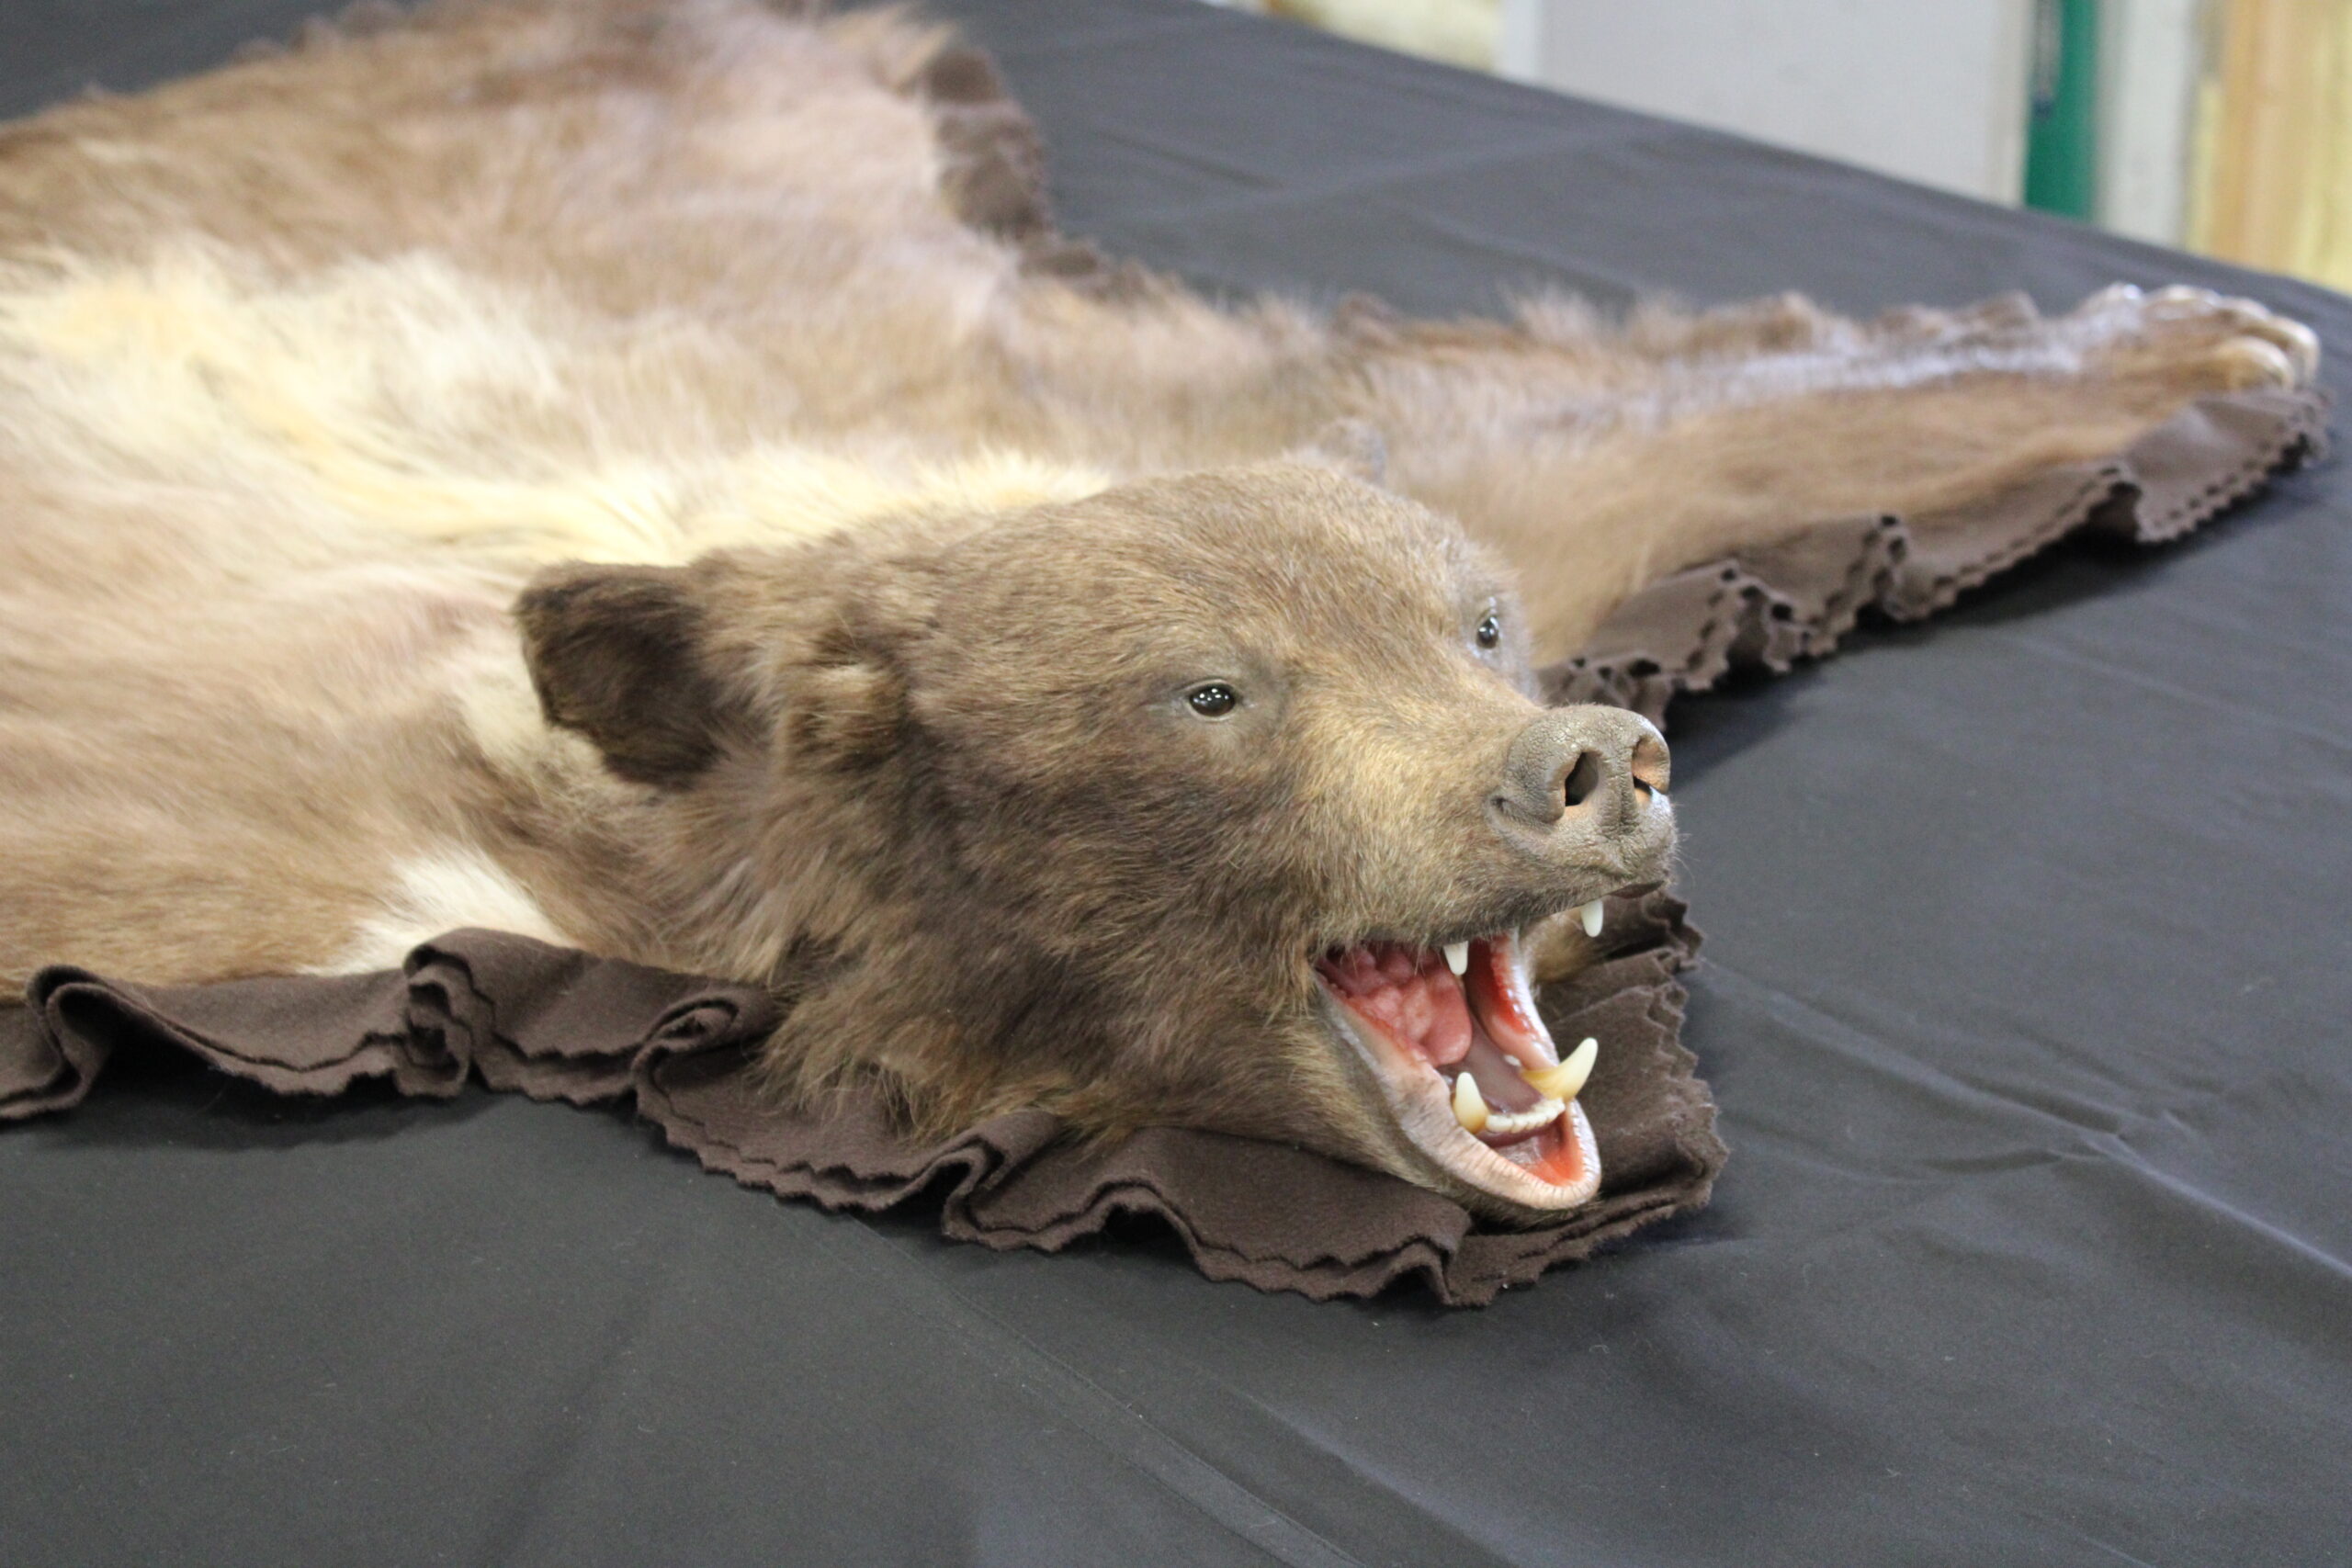 Bear Rug with standard cast lip open mouth